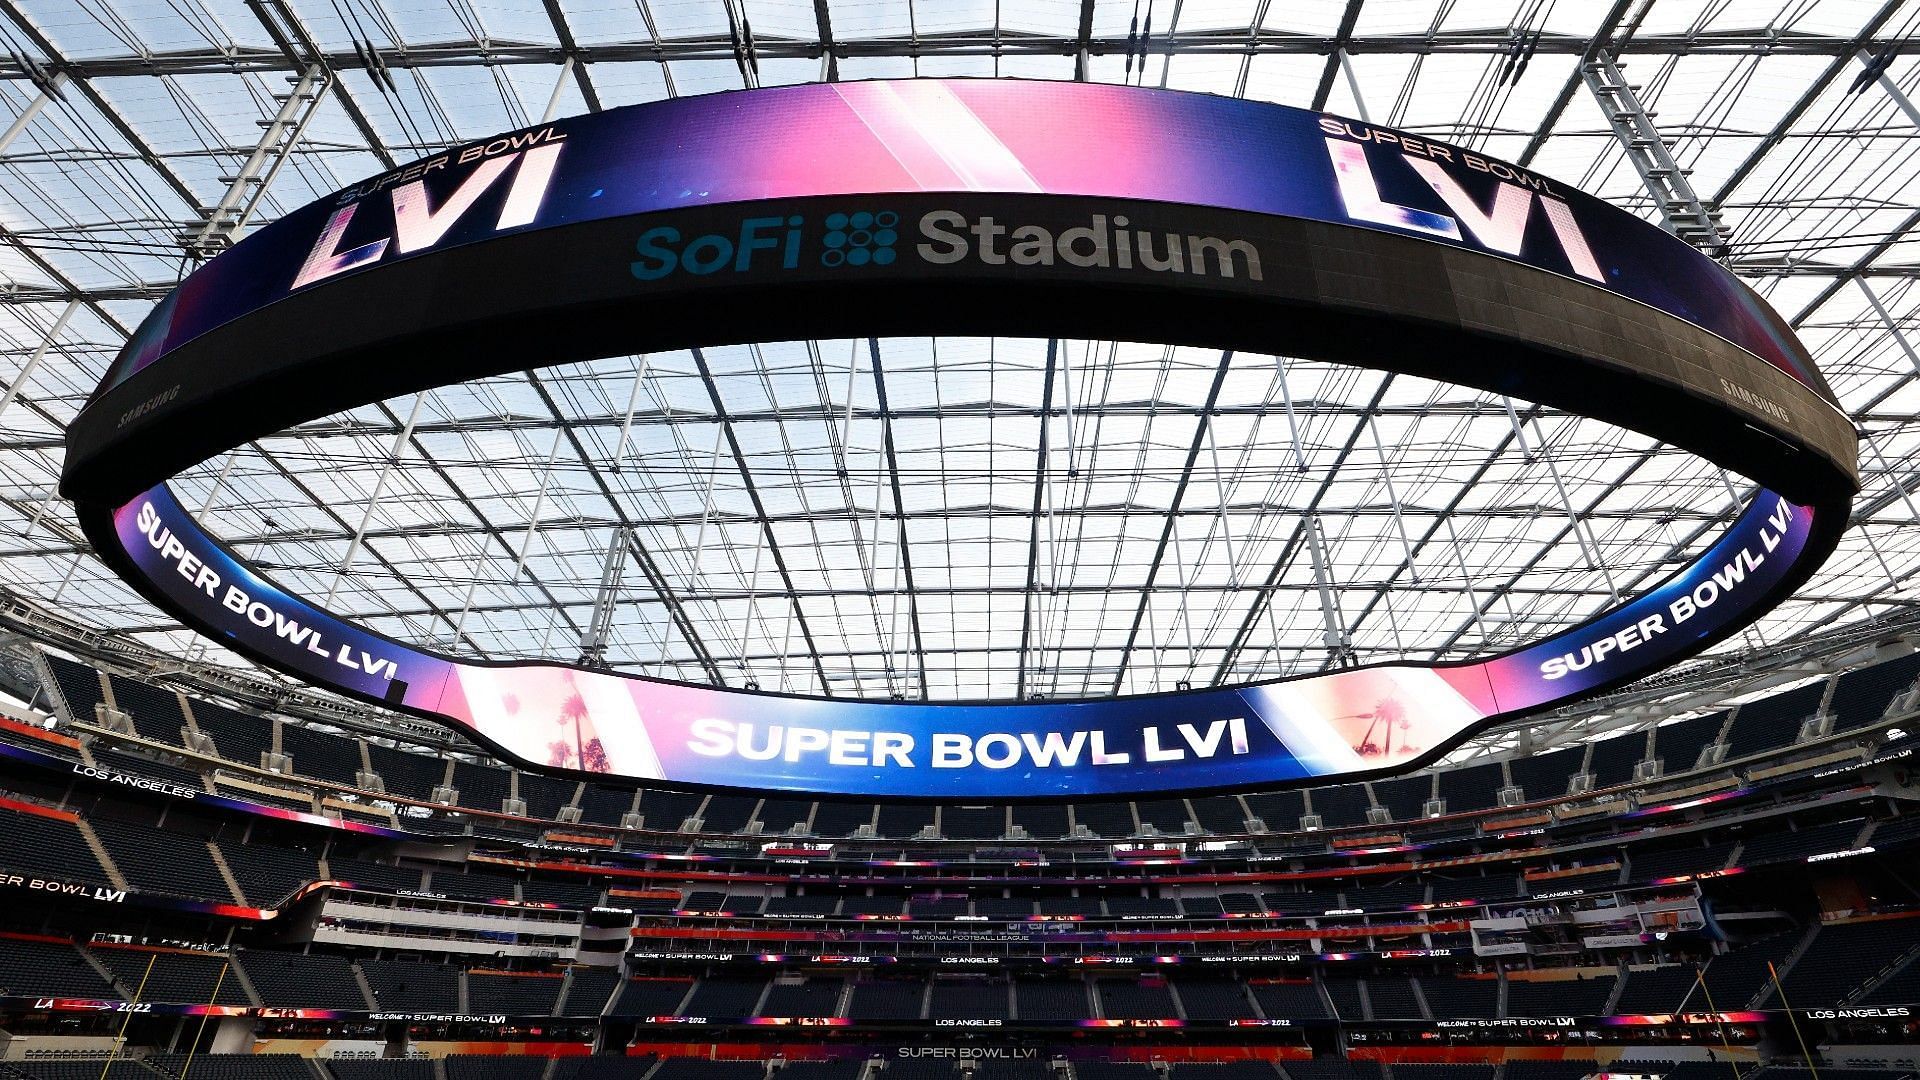 the price of Super Bowl advertising has risen steadily over time, with 30-second spots costing a record $7 million this year.